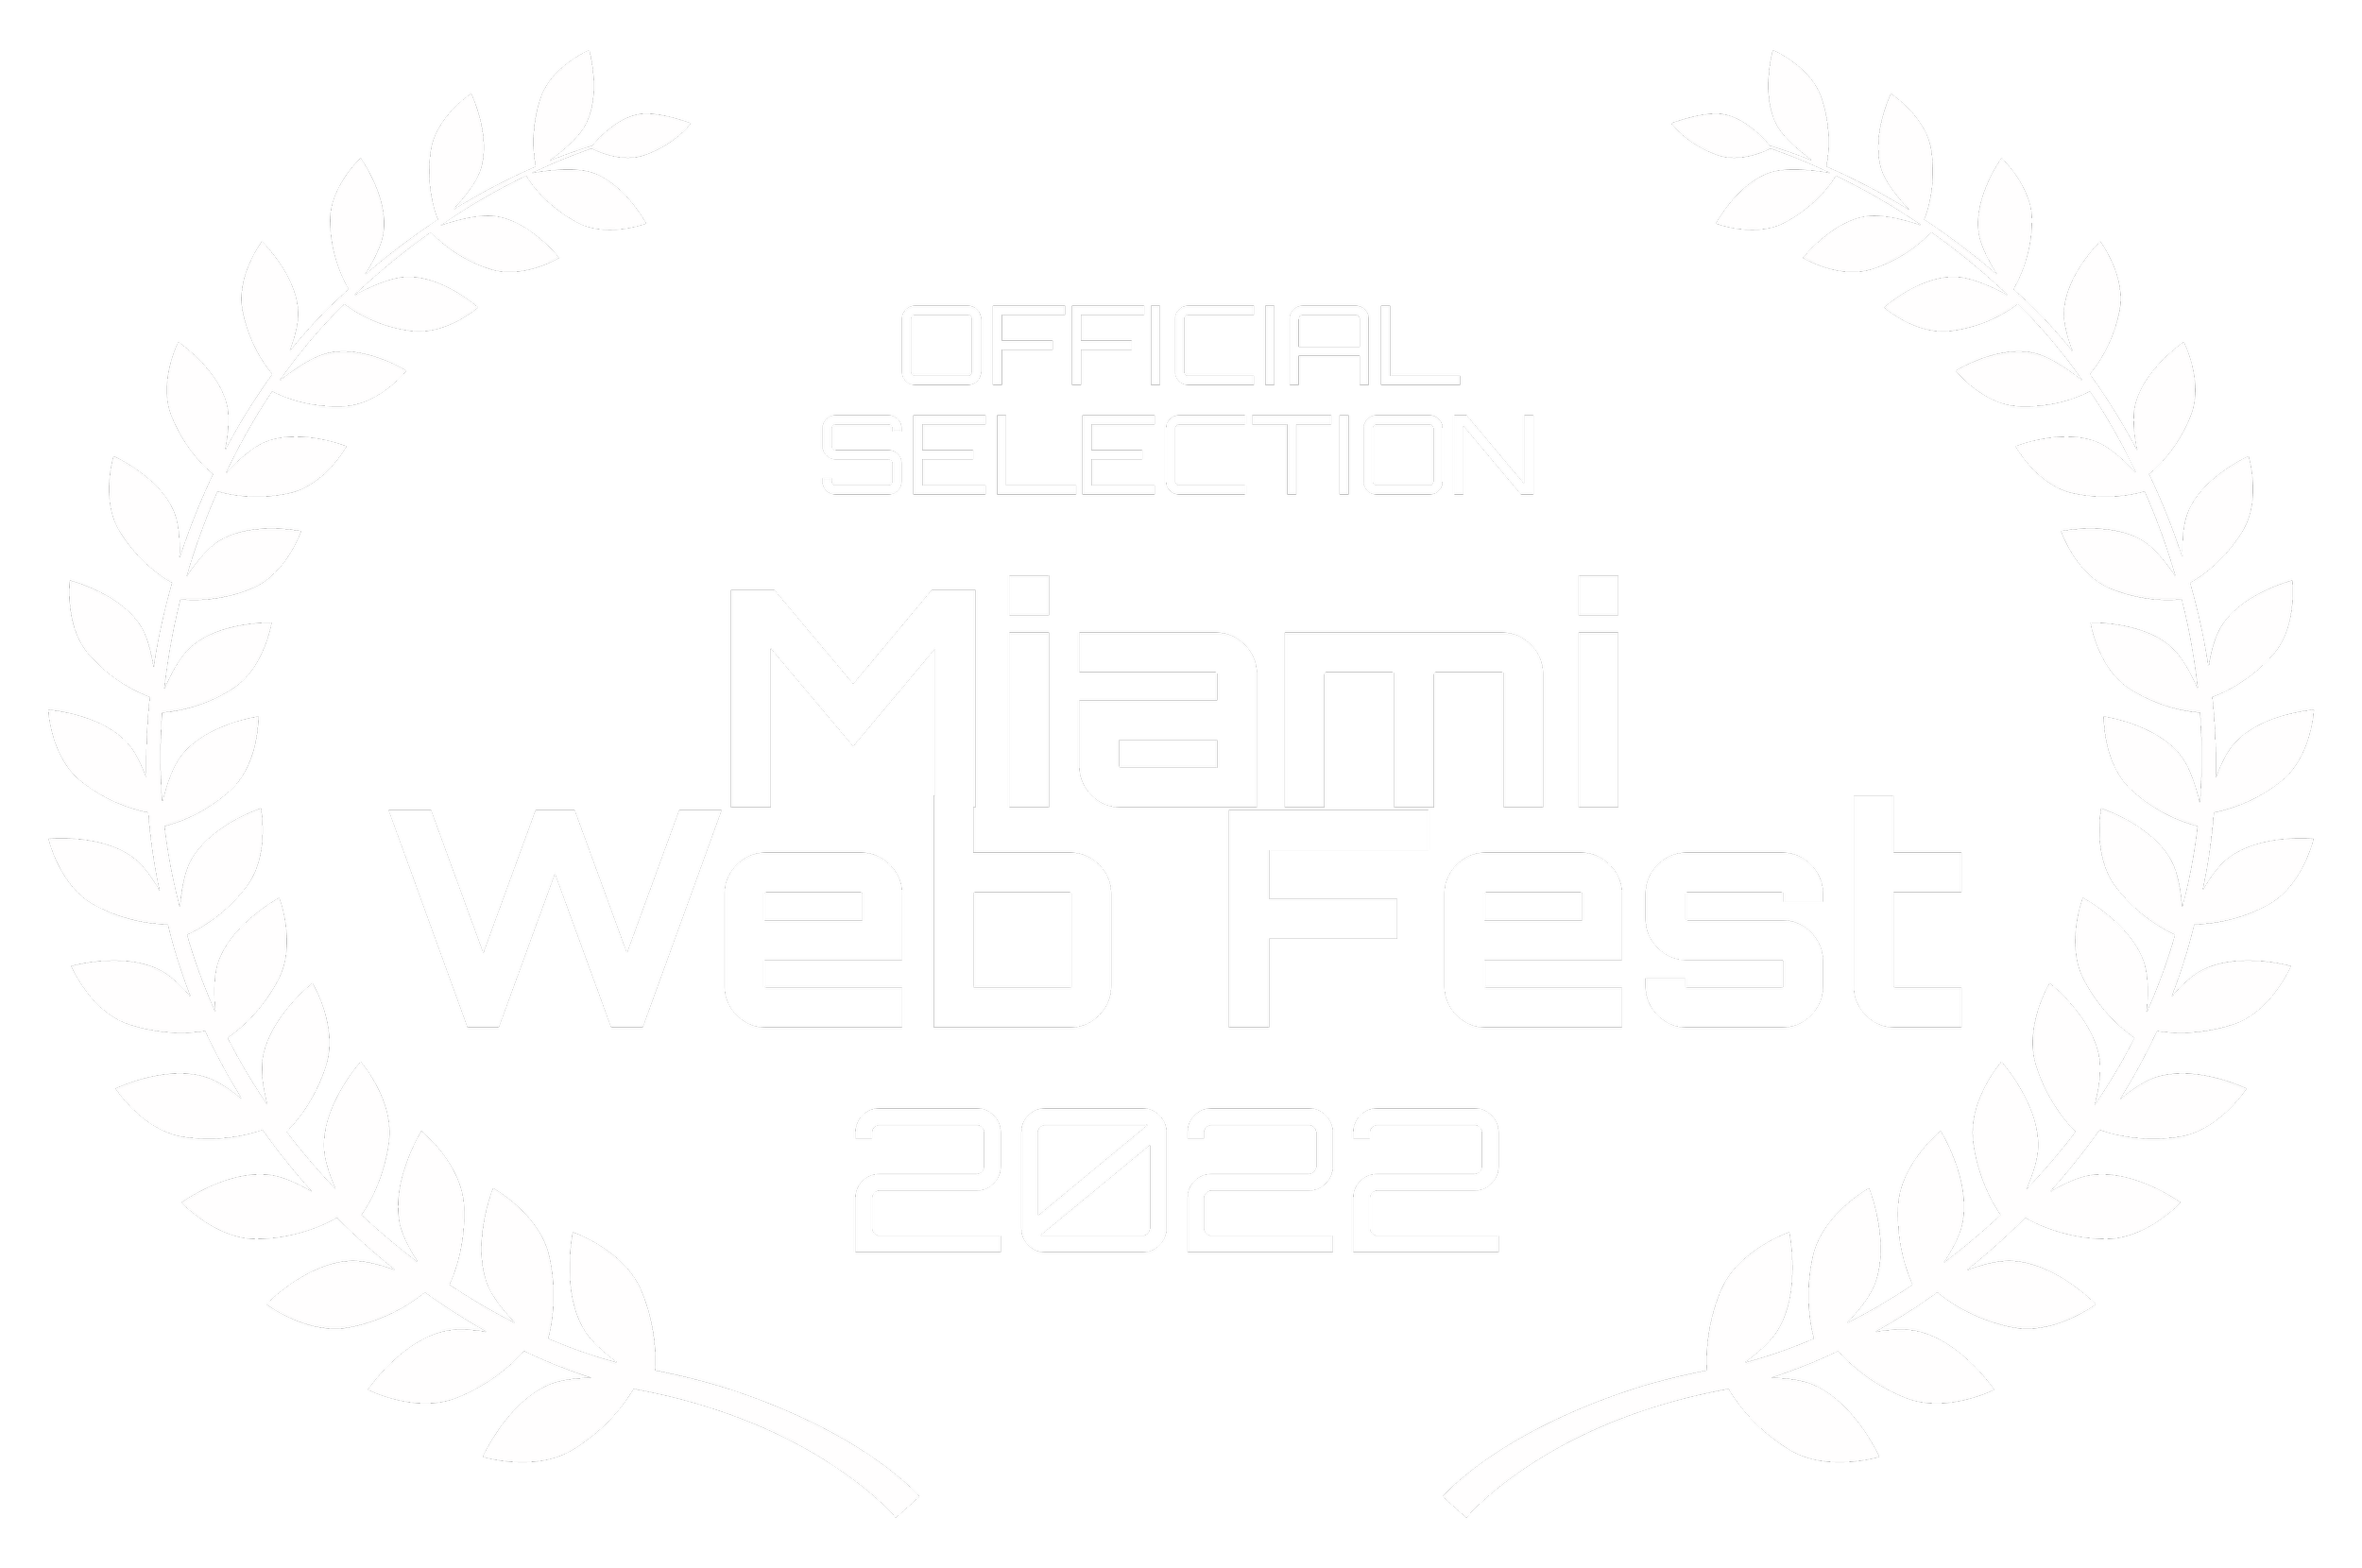 W-OFFICIALSELECTION-MiamiWebFest-2022.png